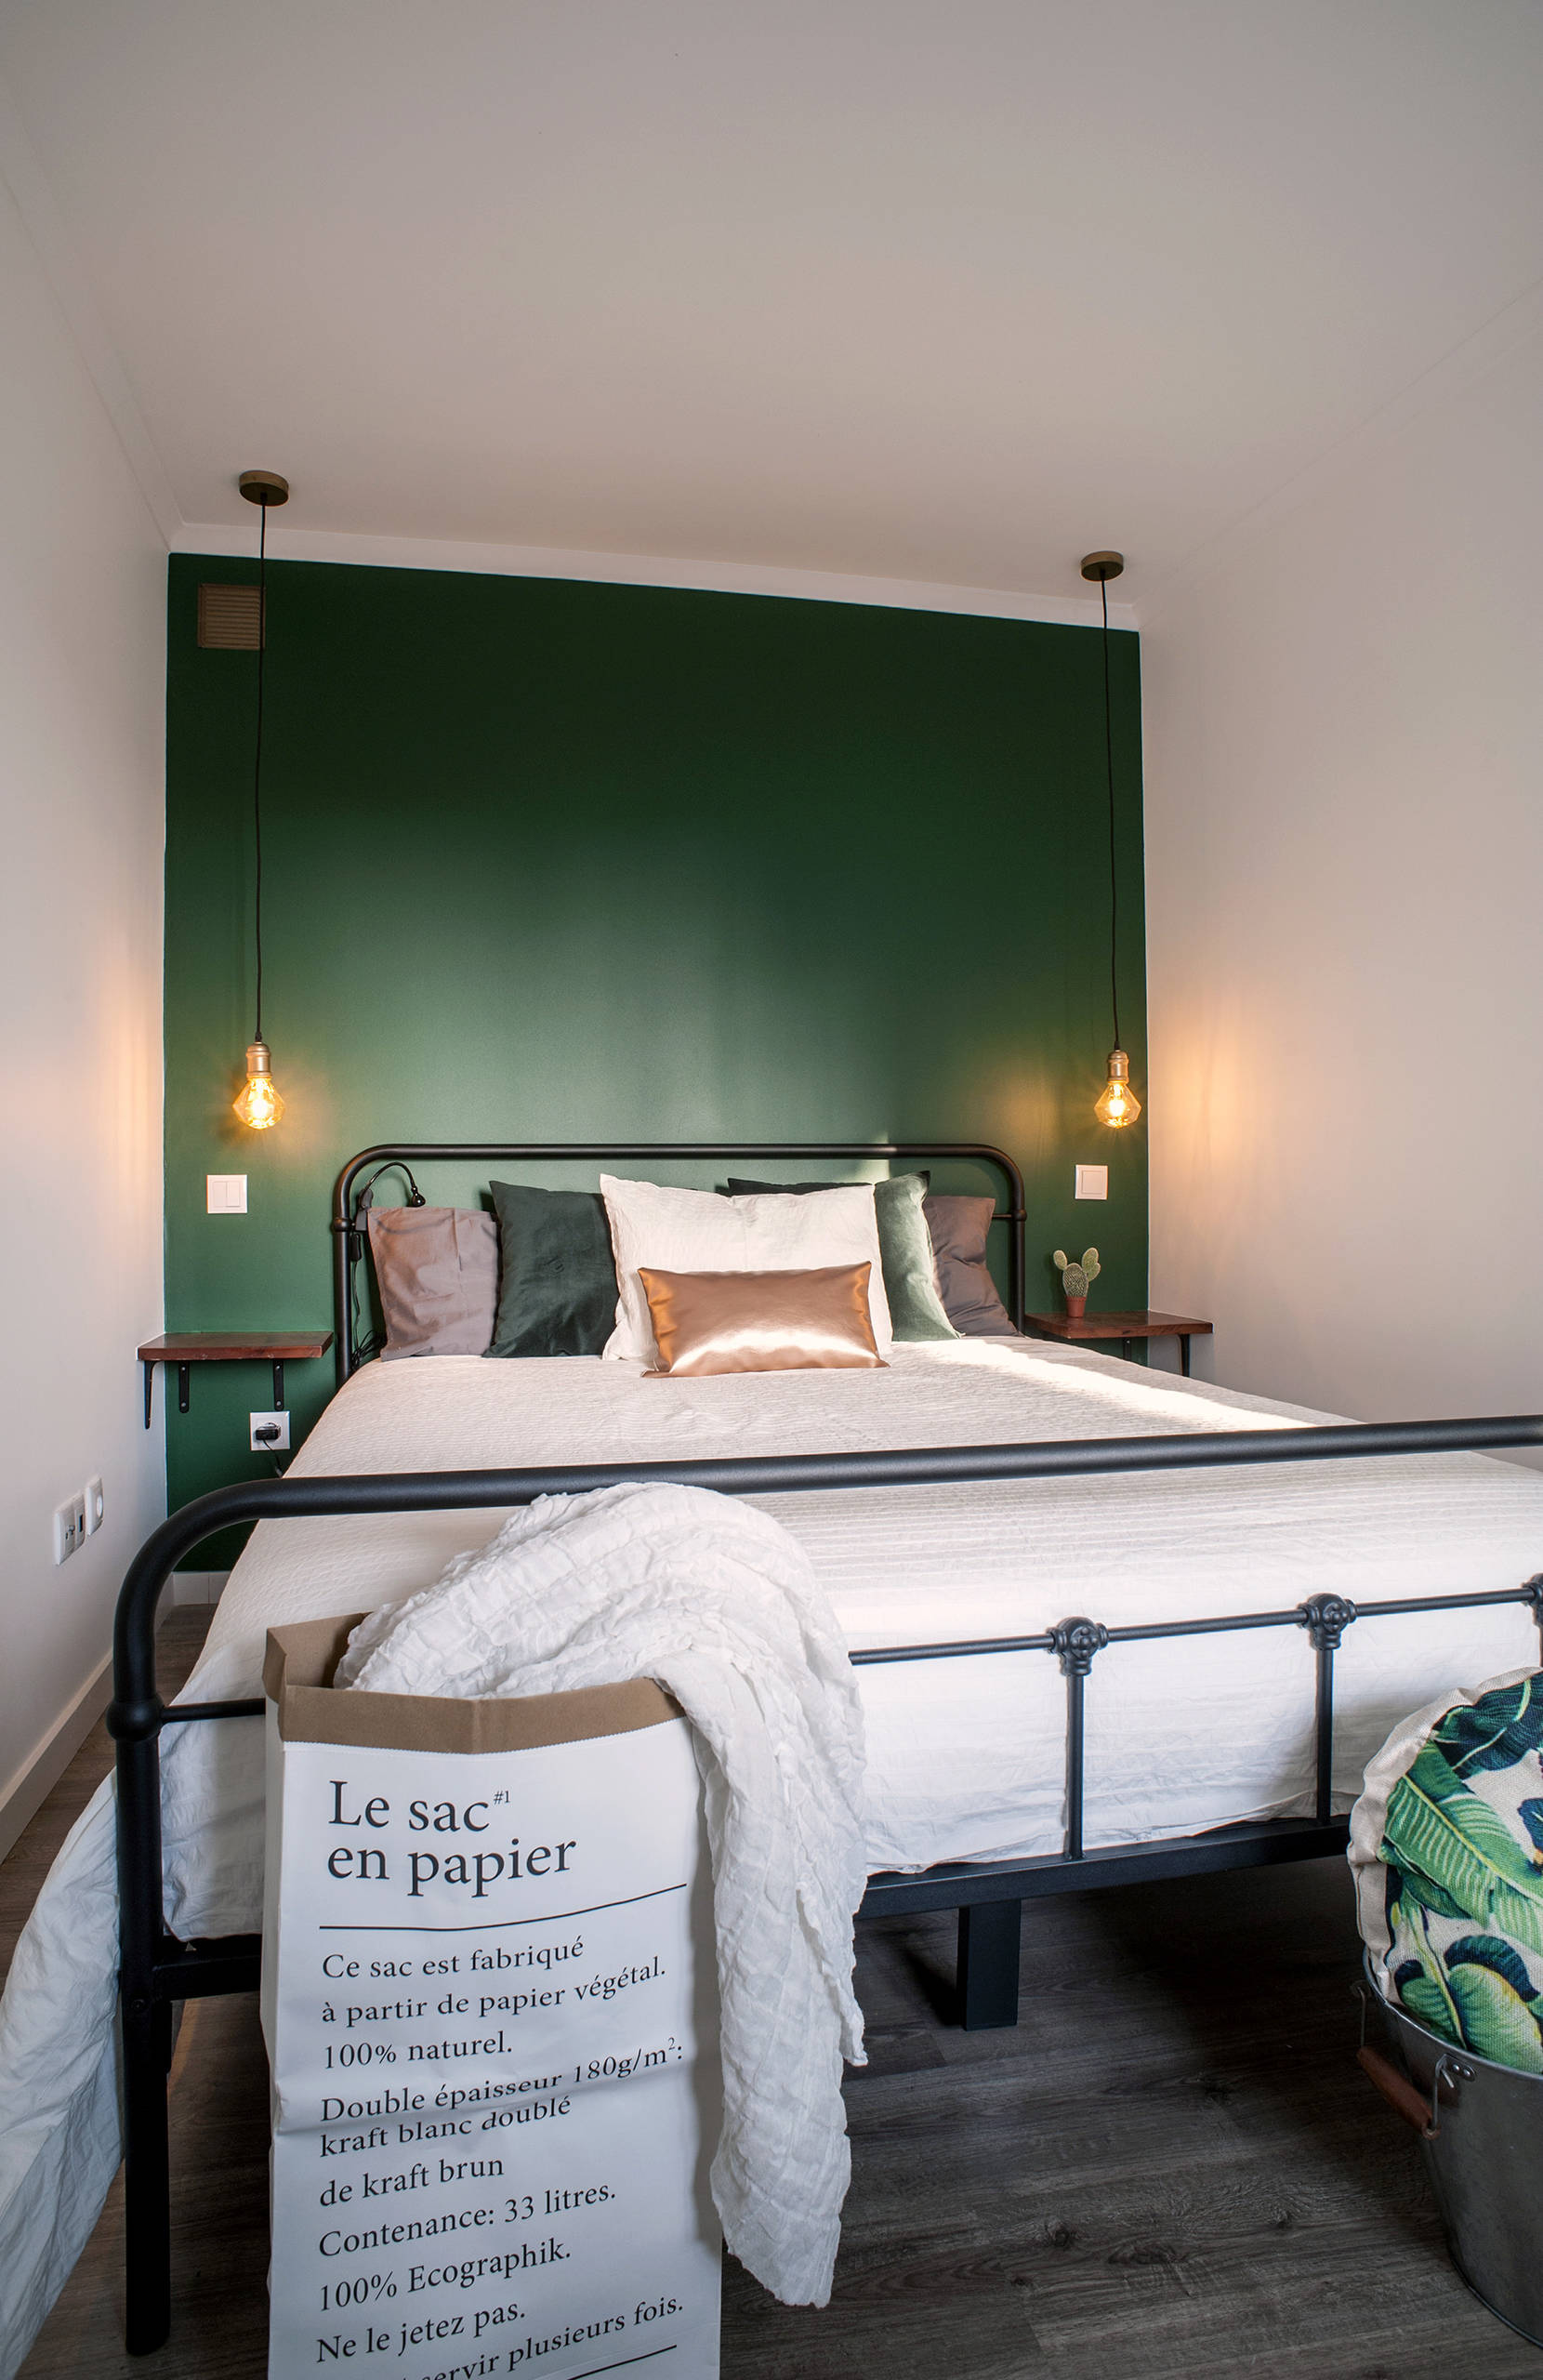 75 Beautiful Small Bedroom With Green Walls Pictures Ideas April 2021 Houzz